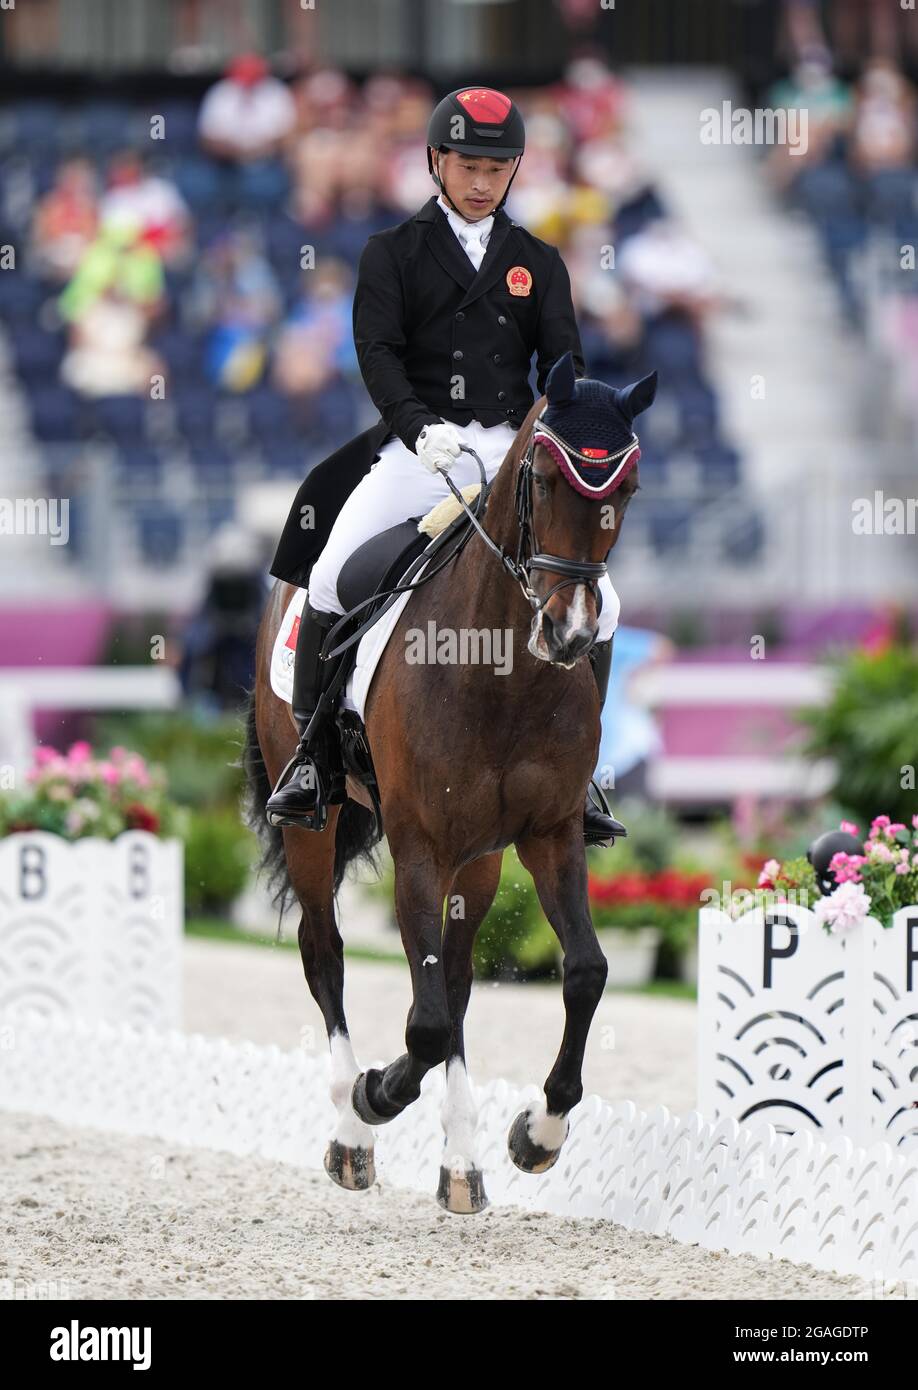 Tokyo, Japan. 31st July, 2021. Bao Yingfeng of China and his horse Flandia 2 perform during the equestrian dressage event at the Tokyo 2020 Olympic Games in Tokyo, Japan, July 31, 2021. Credit: Zhu Zheng/Xinhua/Alamy Live News Stock Photo